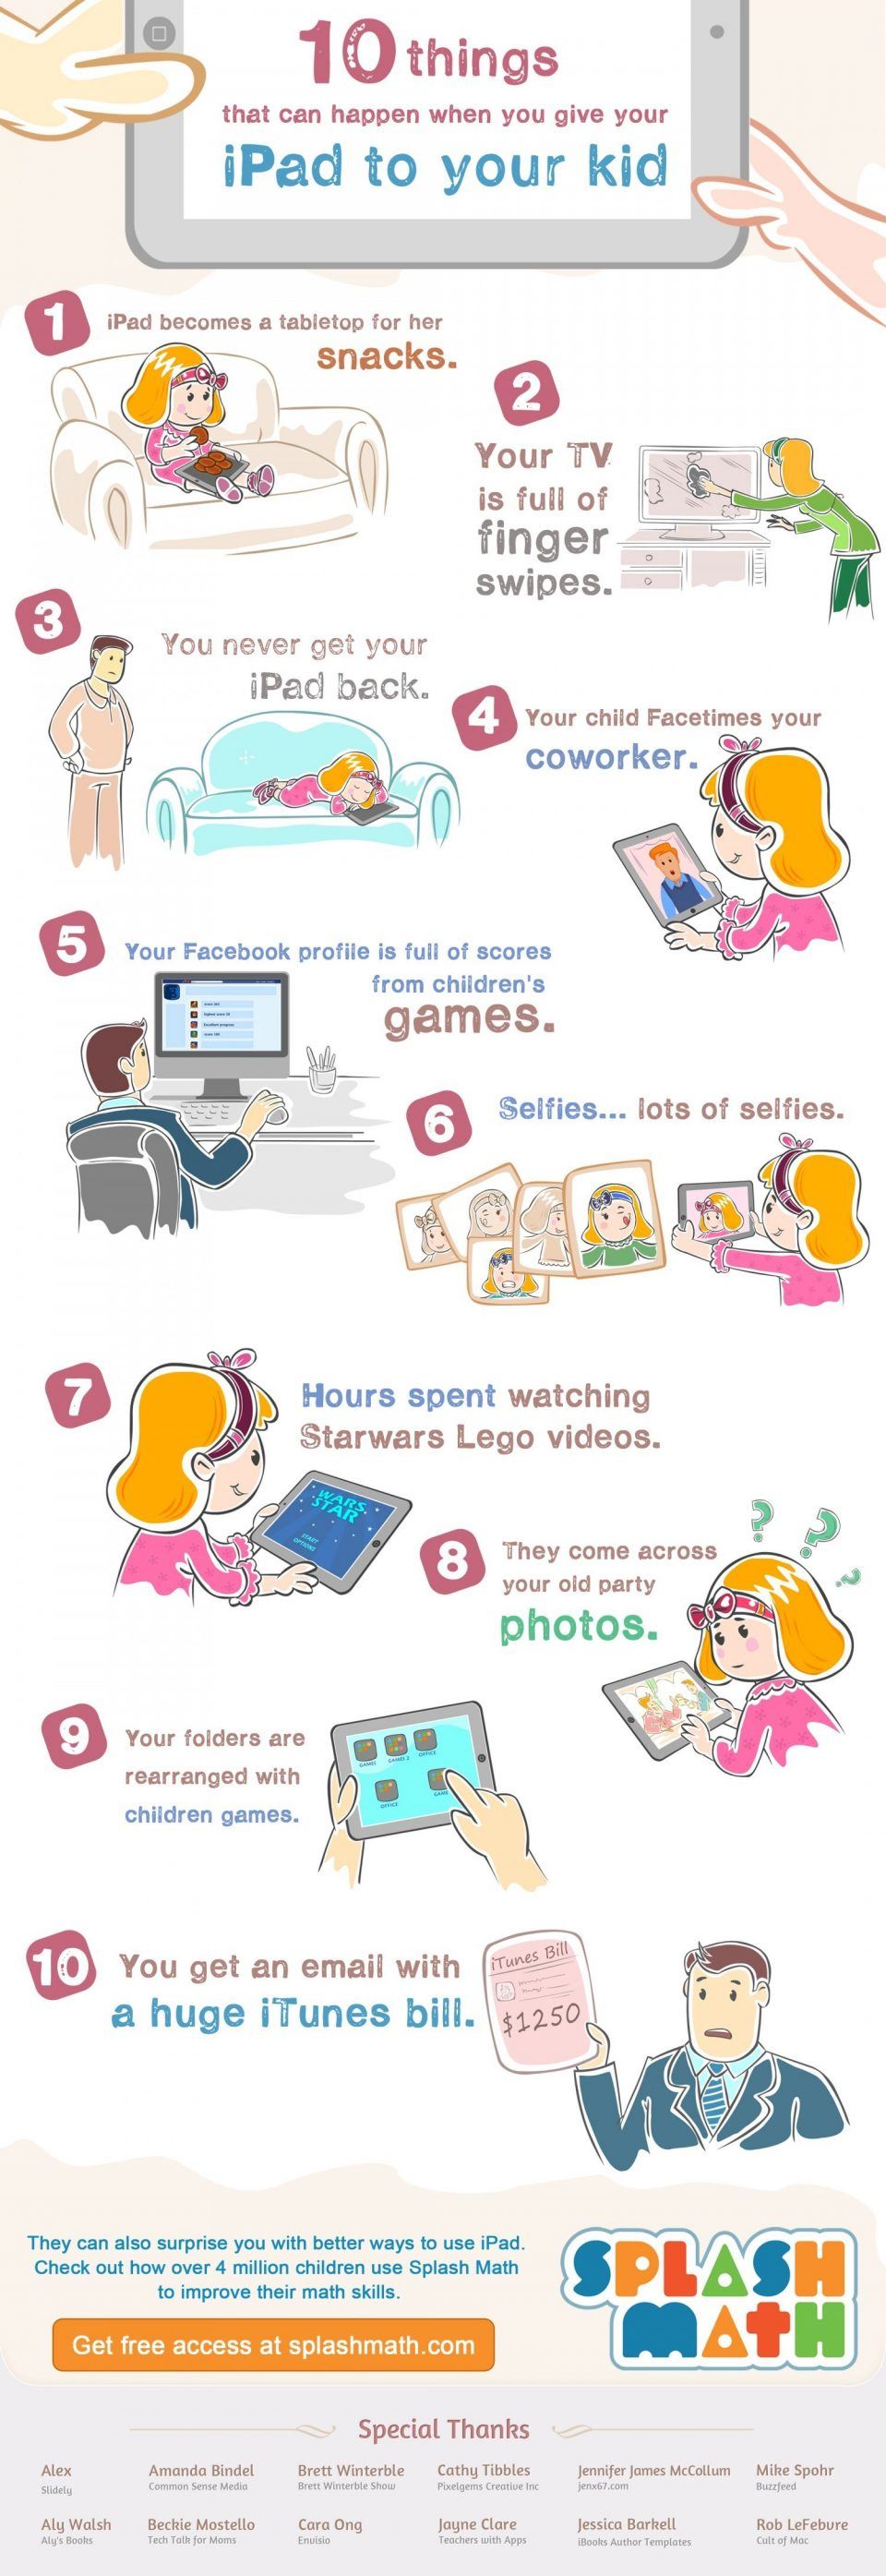 10 Things That Can Happen When You Give Your iPad to Your Kid Infographic